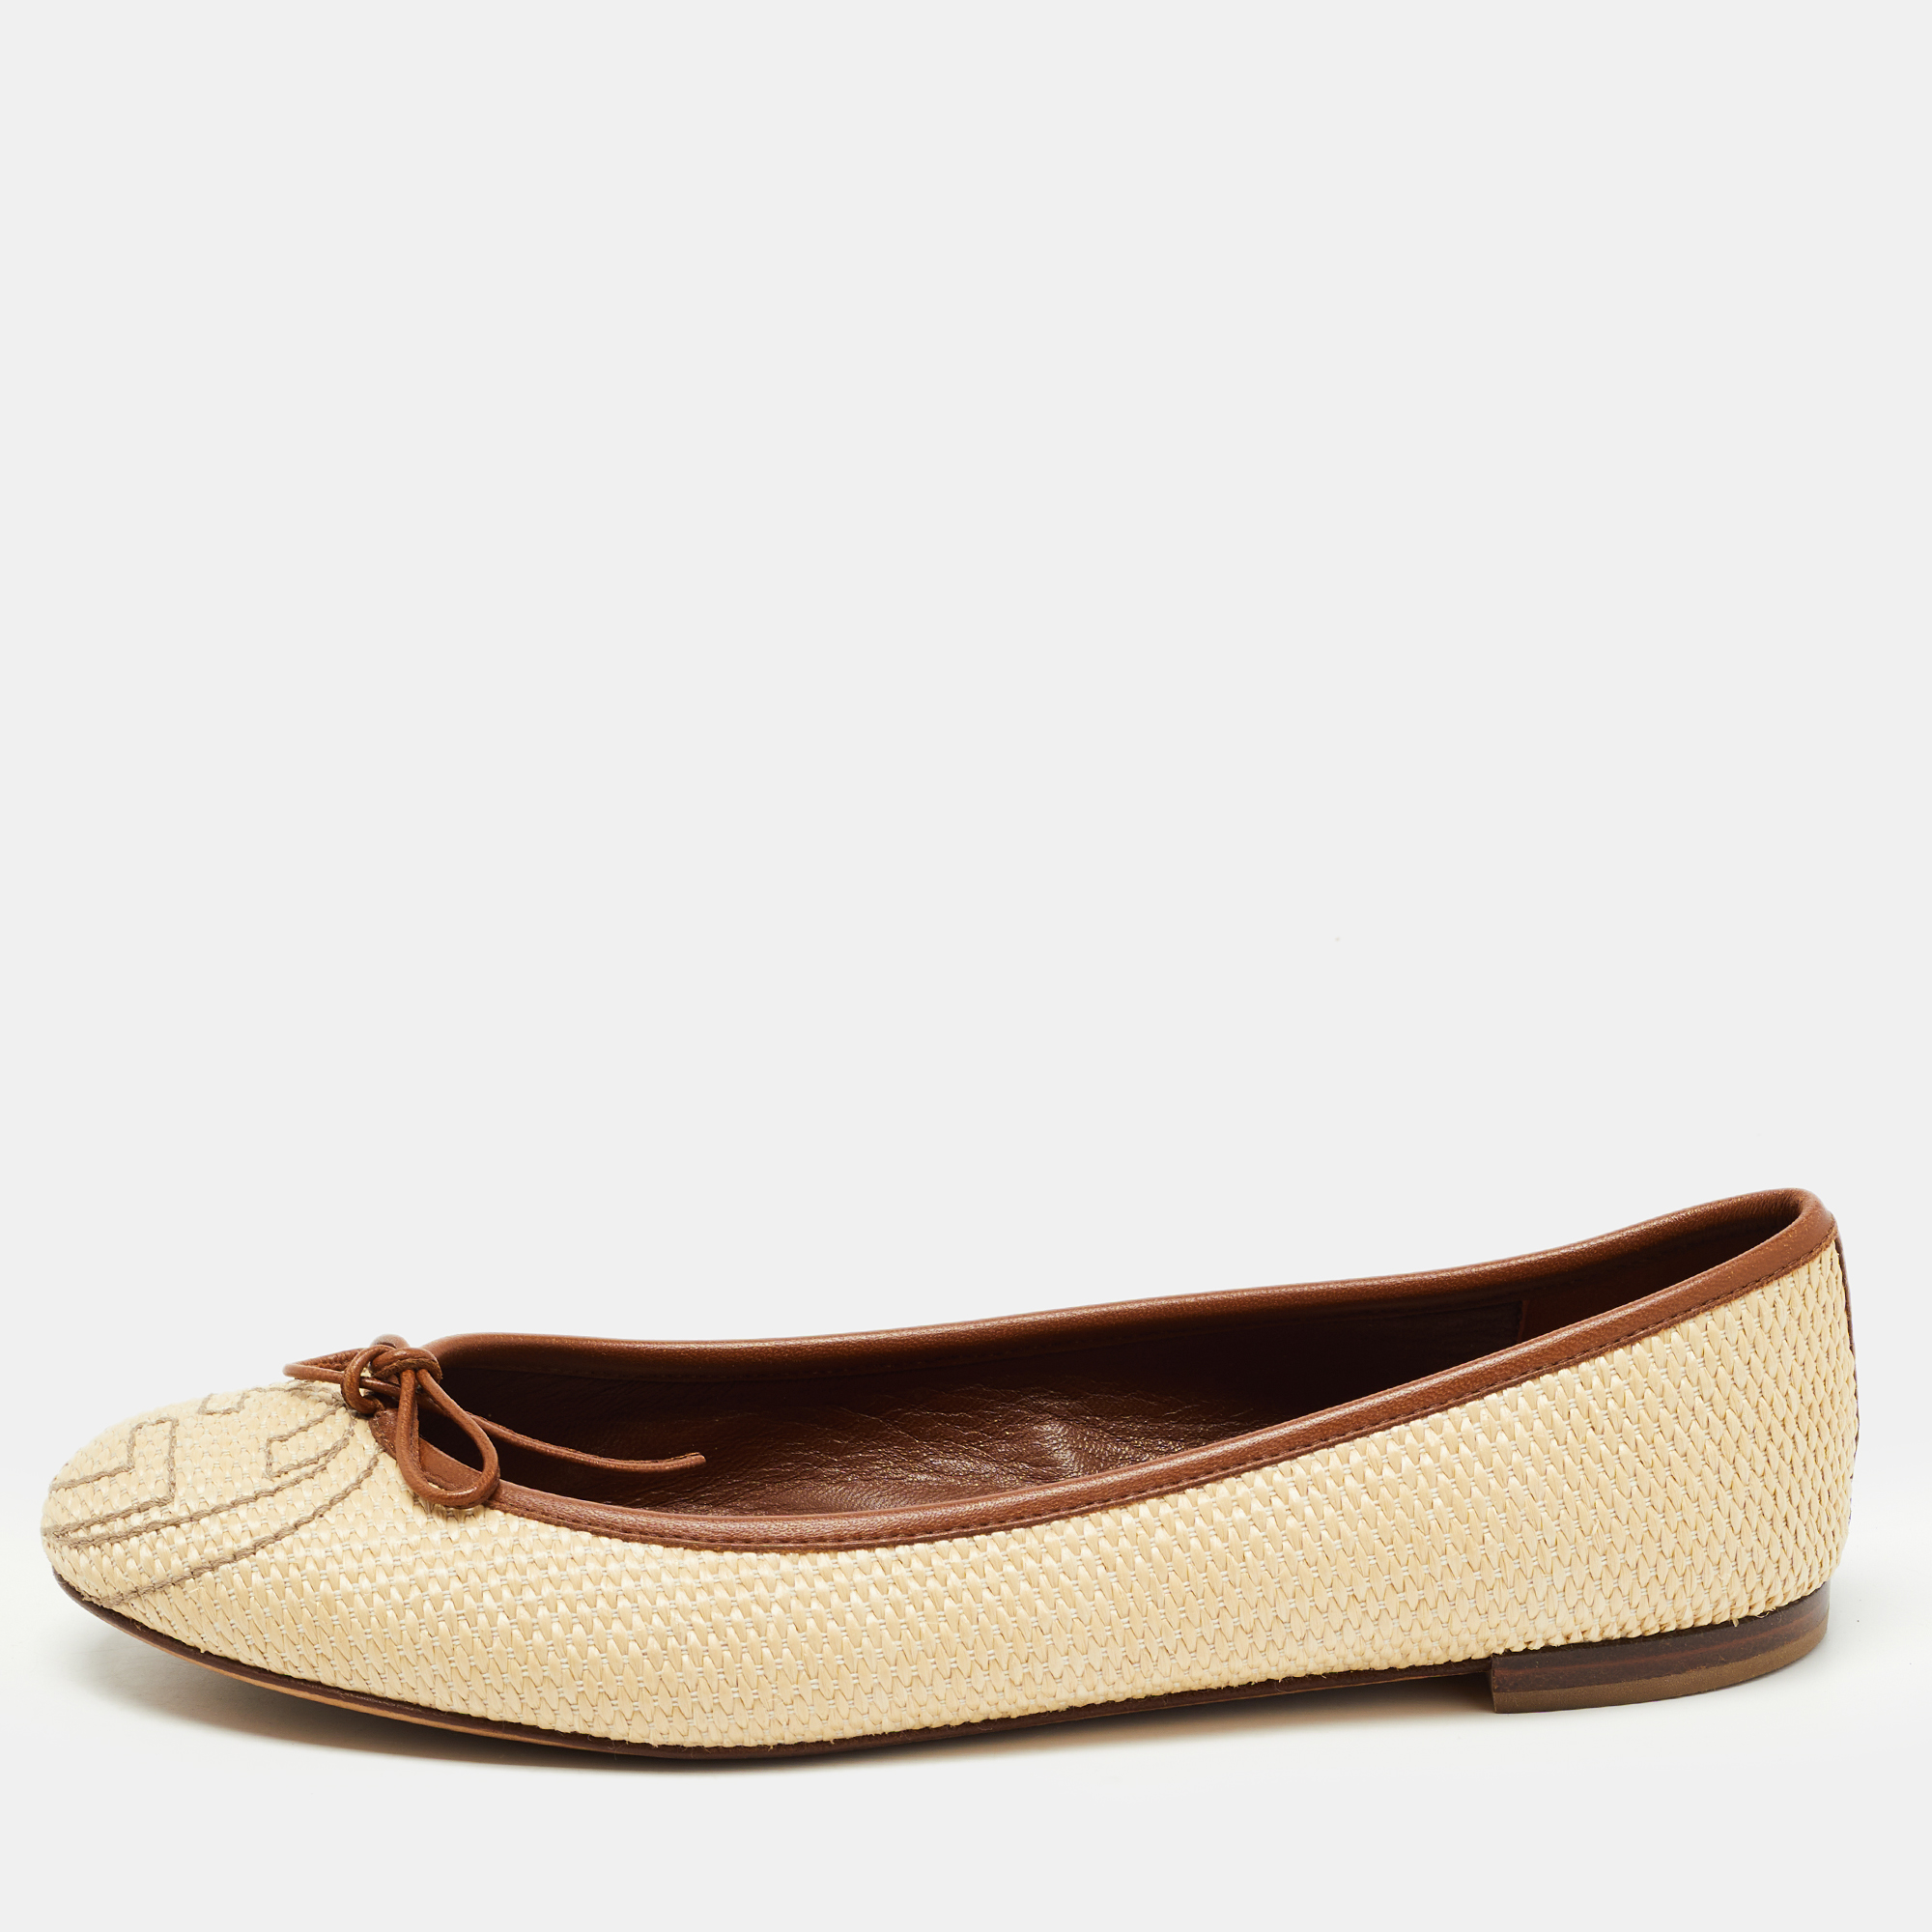 Pre-owned Gucci Cream/brown Leather And Raffia Interlocking G Logo Ballet Flats Size 38.5